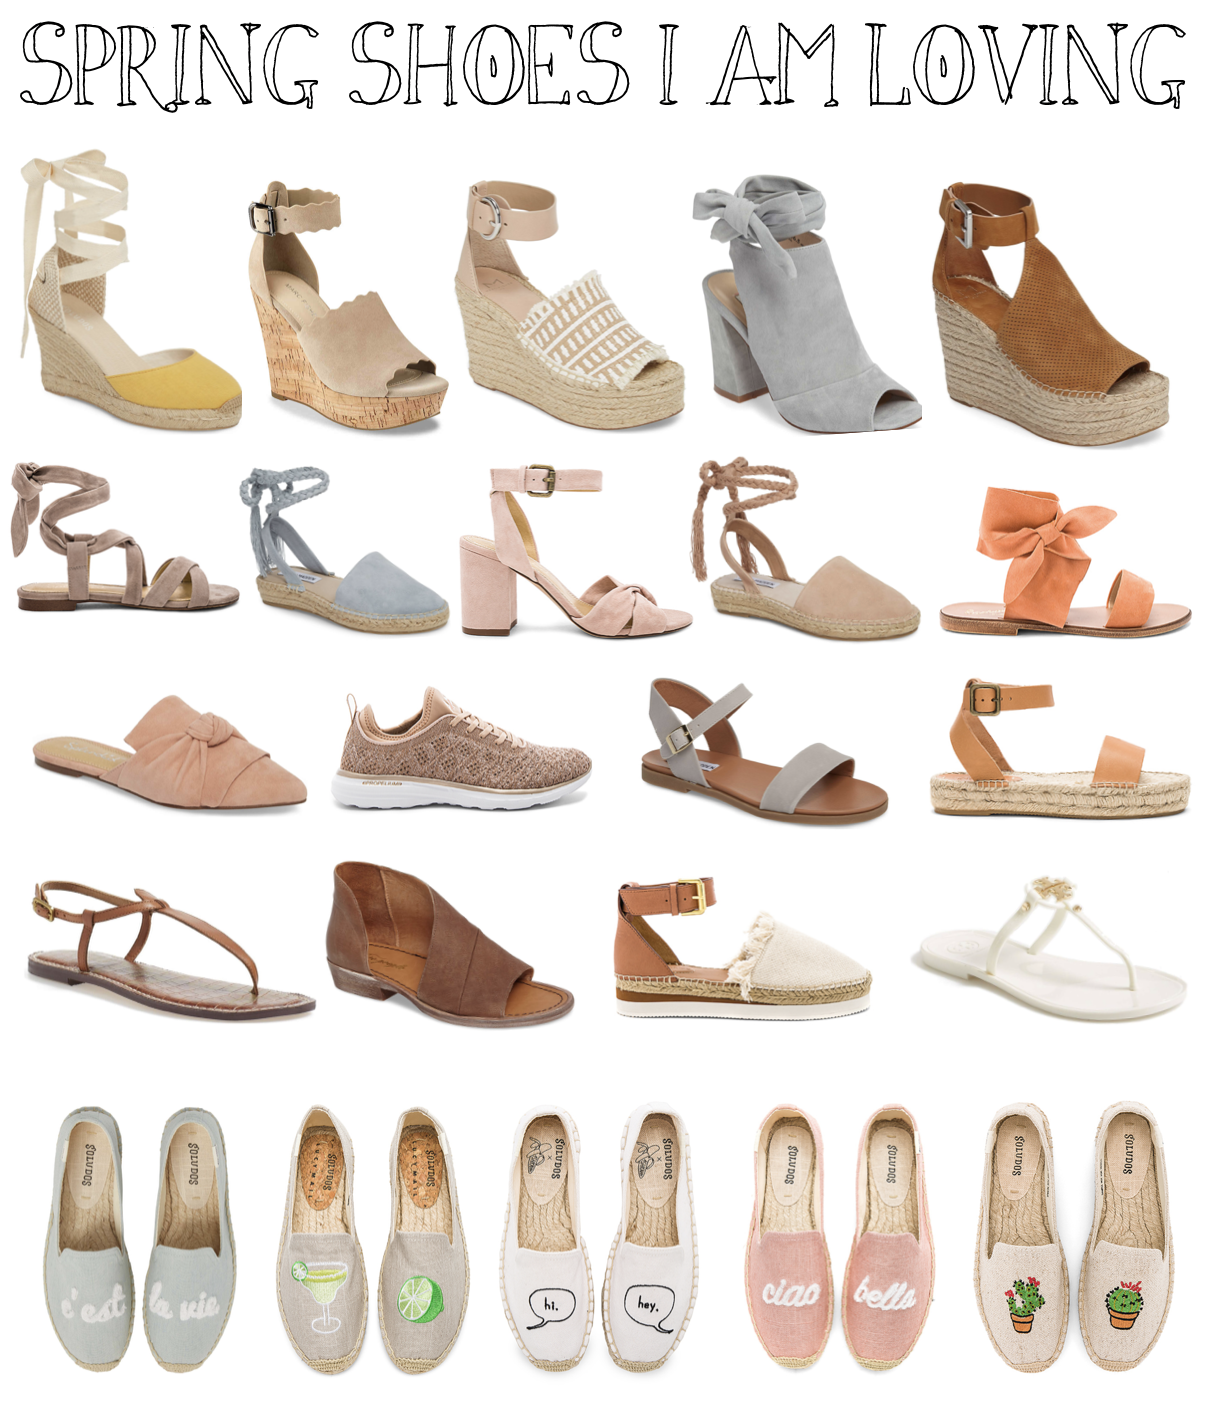 Spring shoes I am loving! Cute spring wedges, sandals, soludos, and more! Details on daily dose of charm by Lauren Lindmark